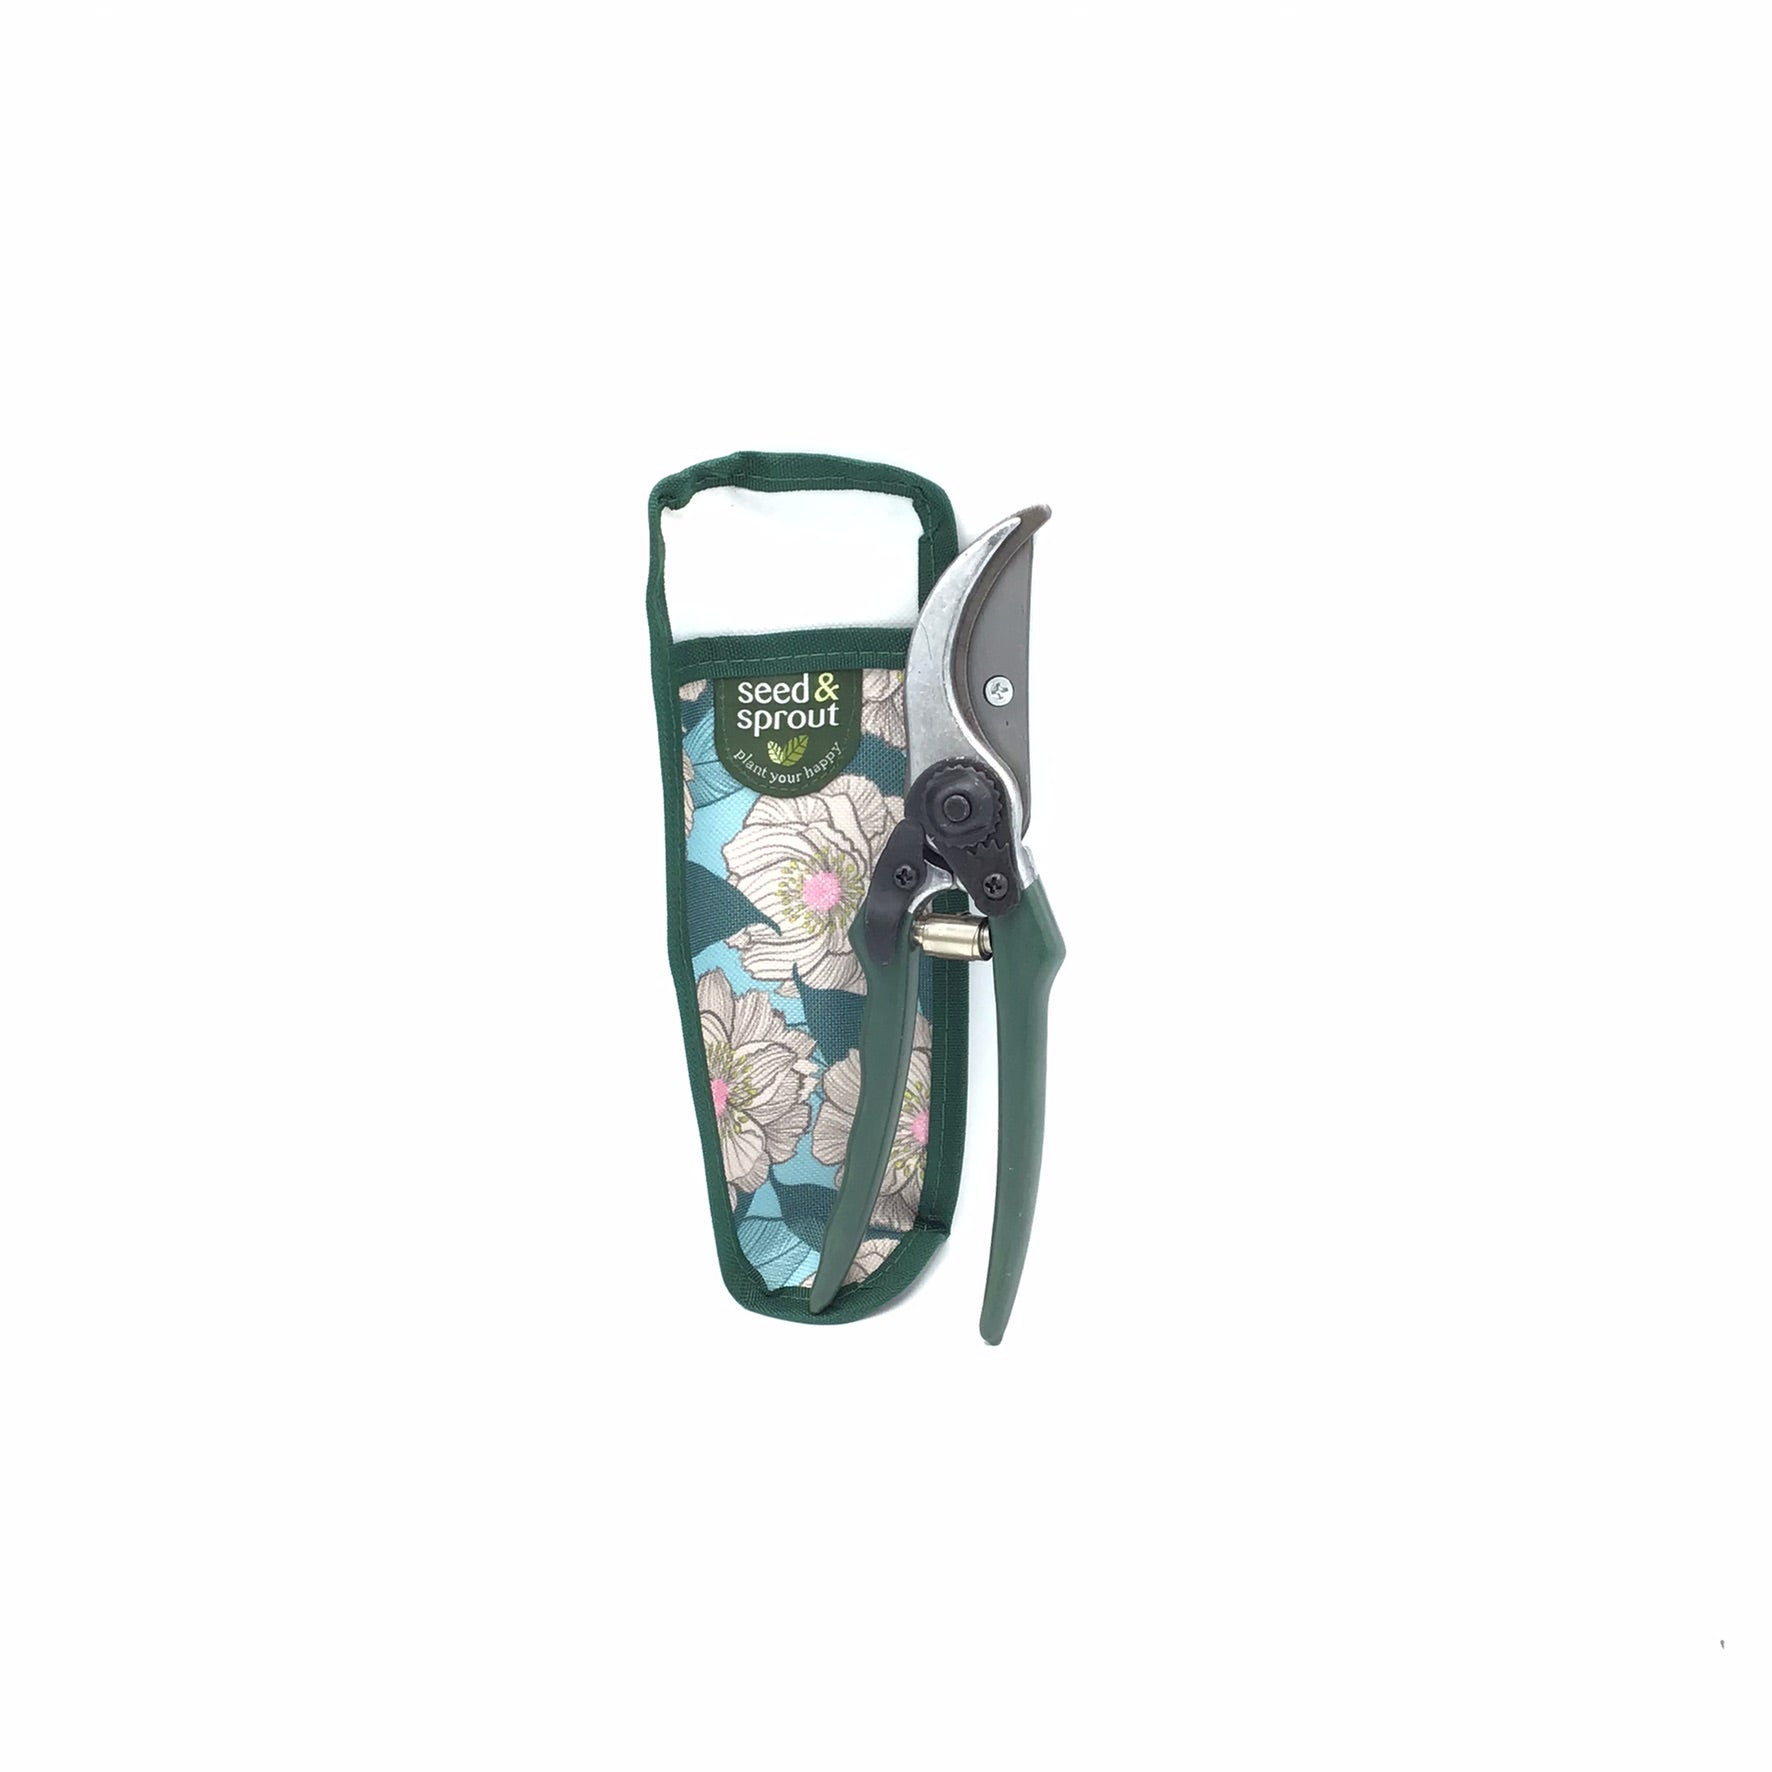 Seed & Sprout Pruning Shears